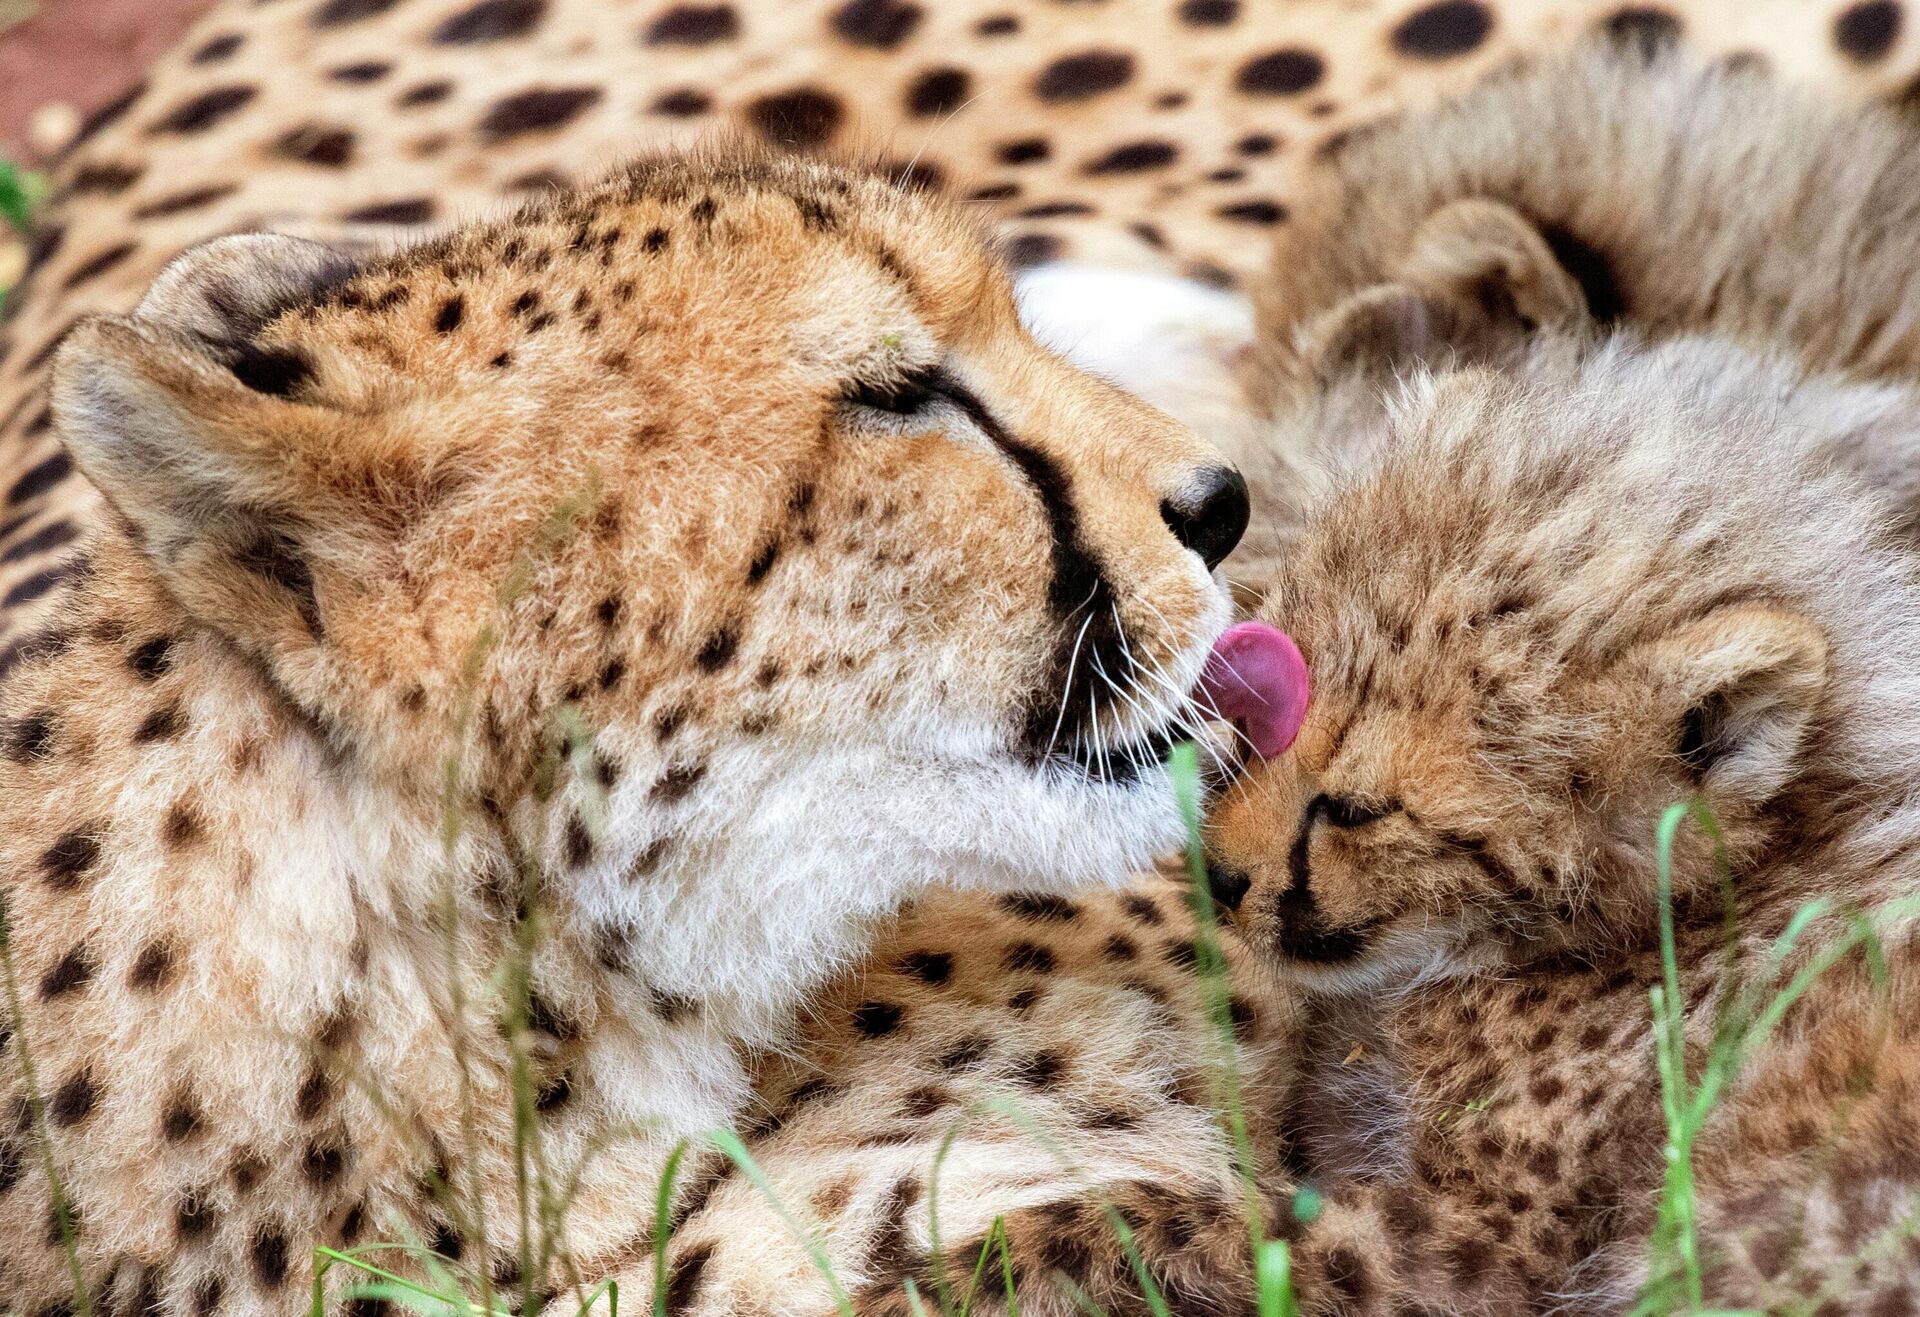 The cheetah mother Freela relaxes with one of her cubs in the Erfurt zoo in Erfurt, Germany, Wednesday, June 27, 2018. The four cheetah cubs, one male and three female, were born on May 9, 2018. (AP Photo/Jens Meyer) - Sputnik India, 1920, 03.10.2023